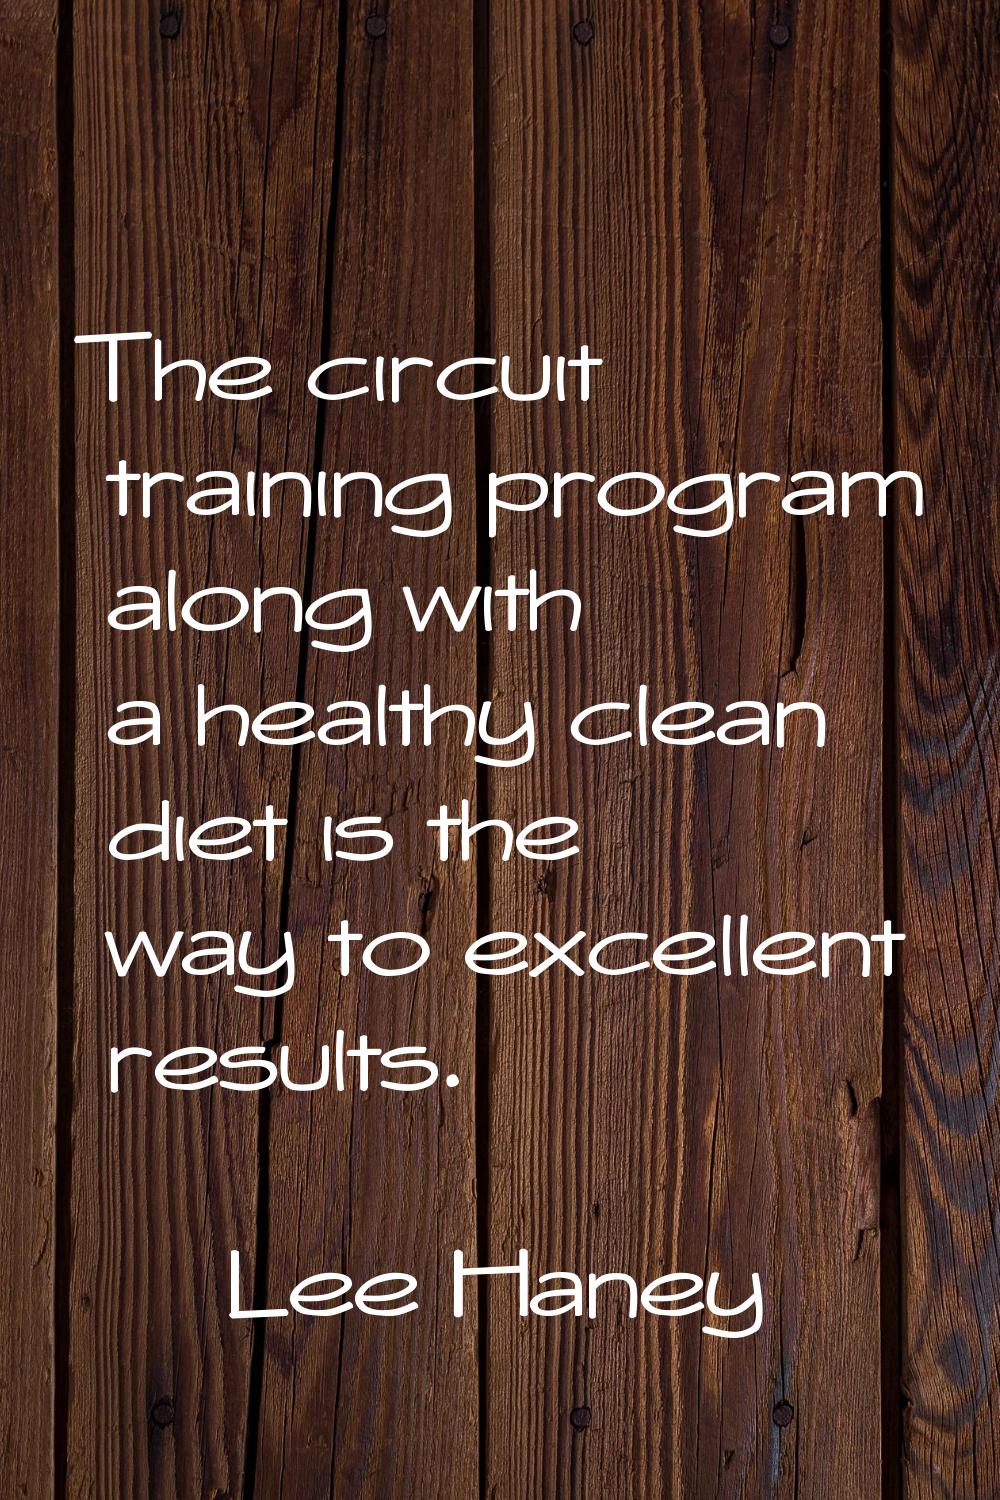 The circuit training program along with a healthy clean diet is the way to excellent results.